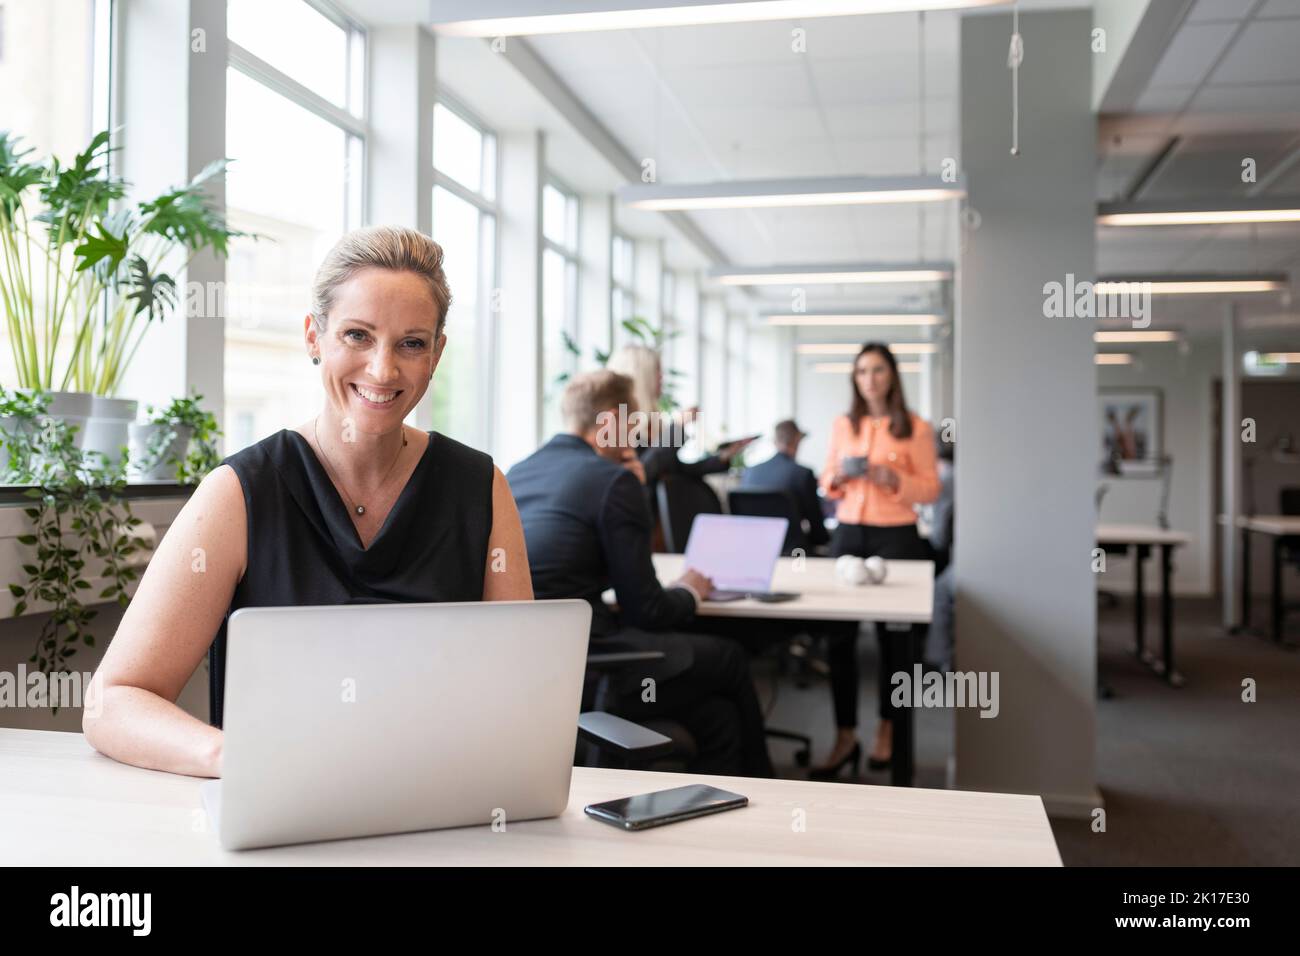 Smiling businesswoman using laptop in office Banque D'Images